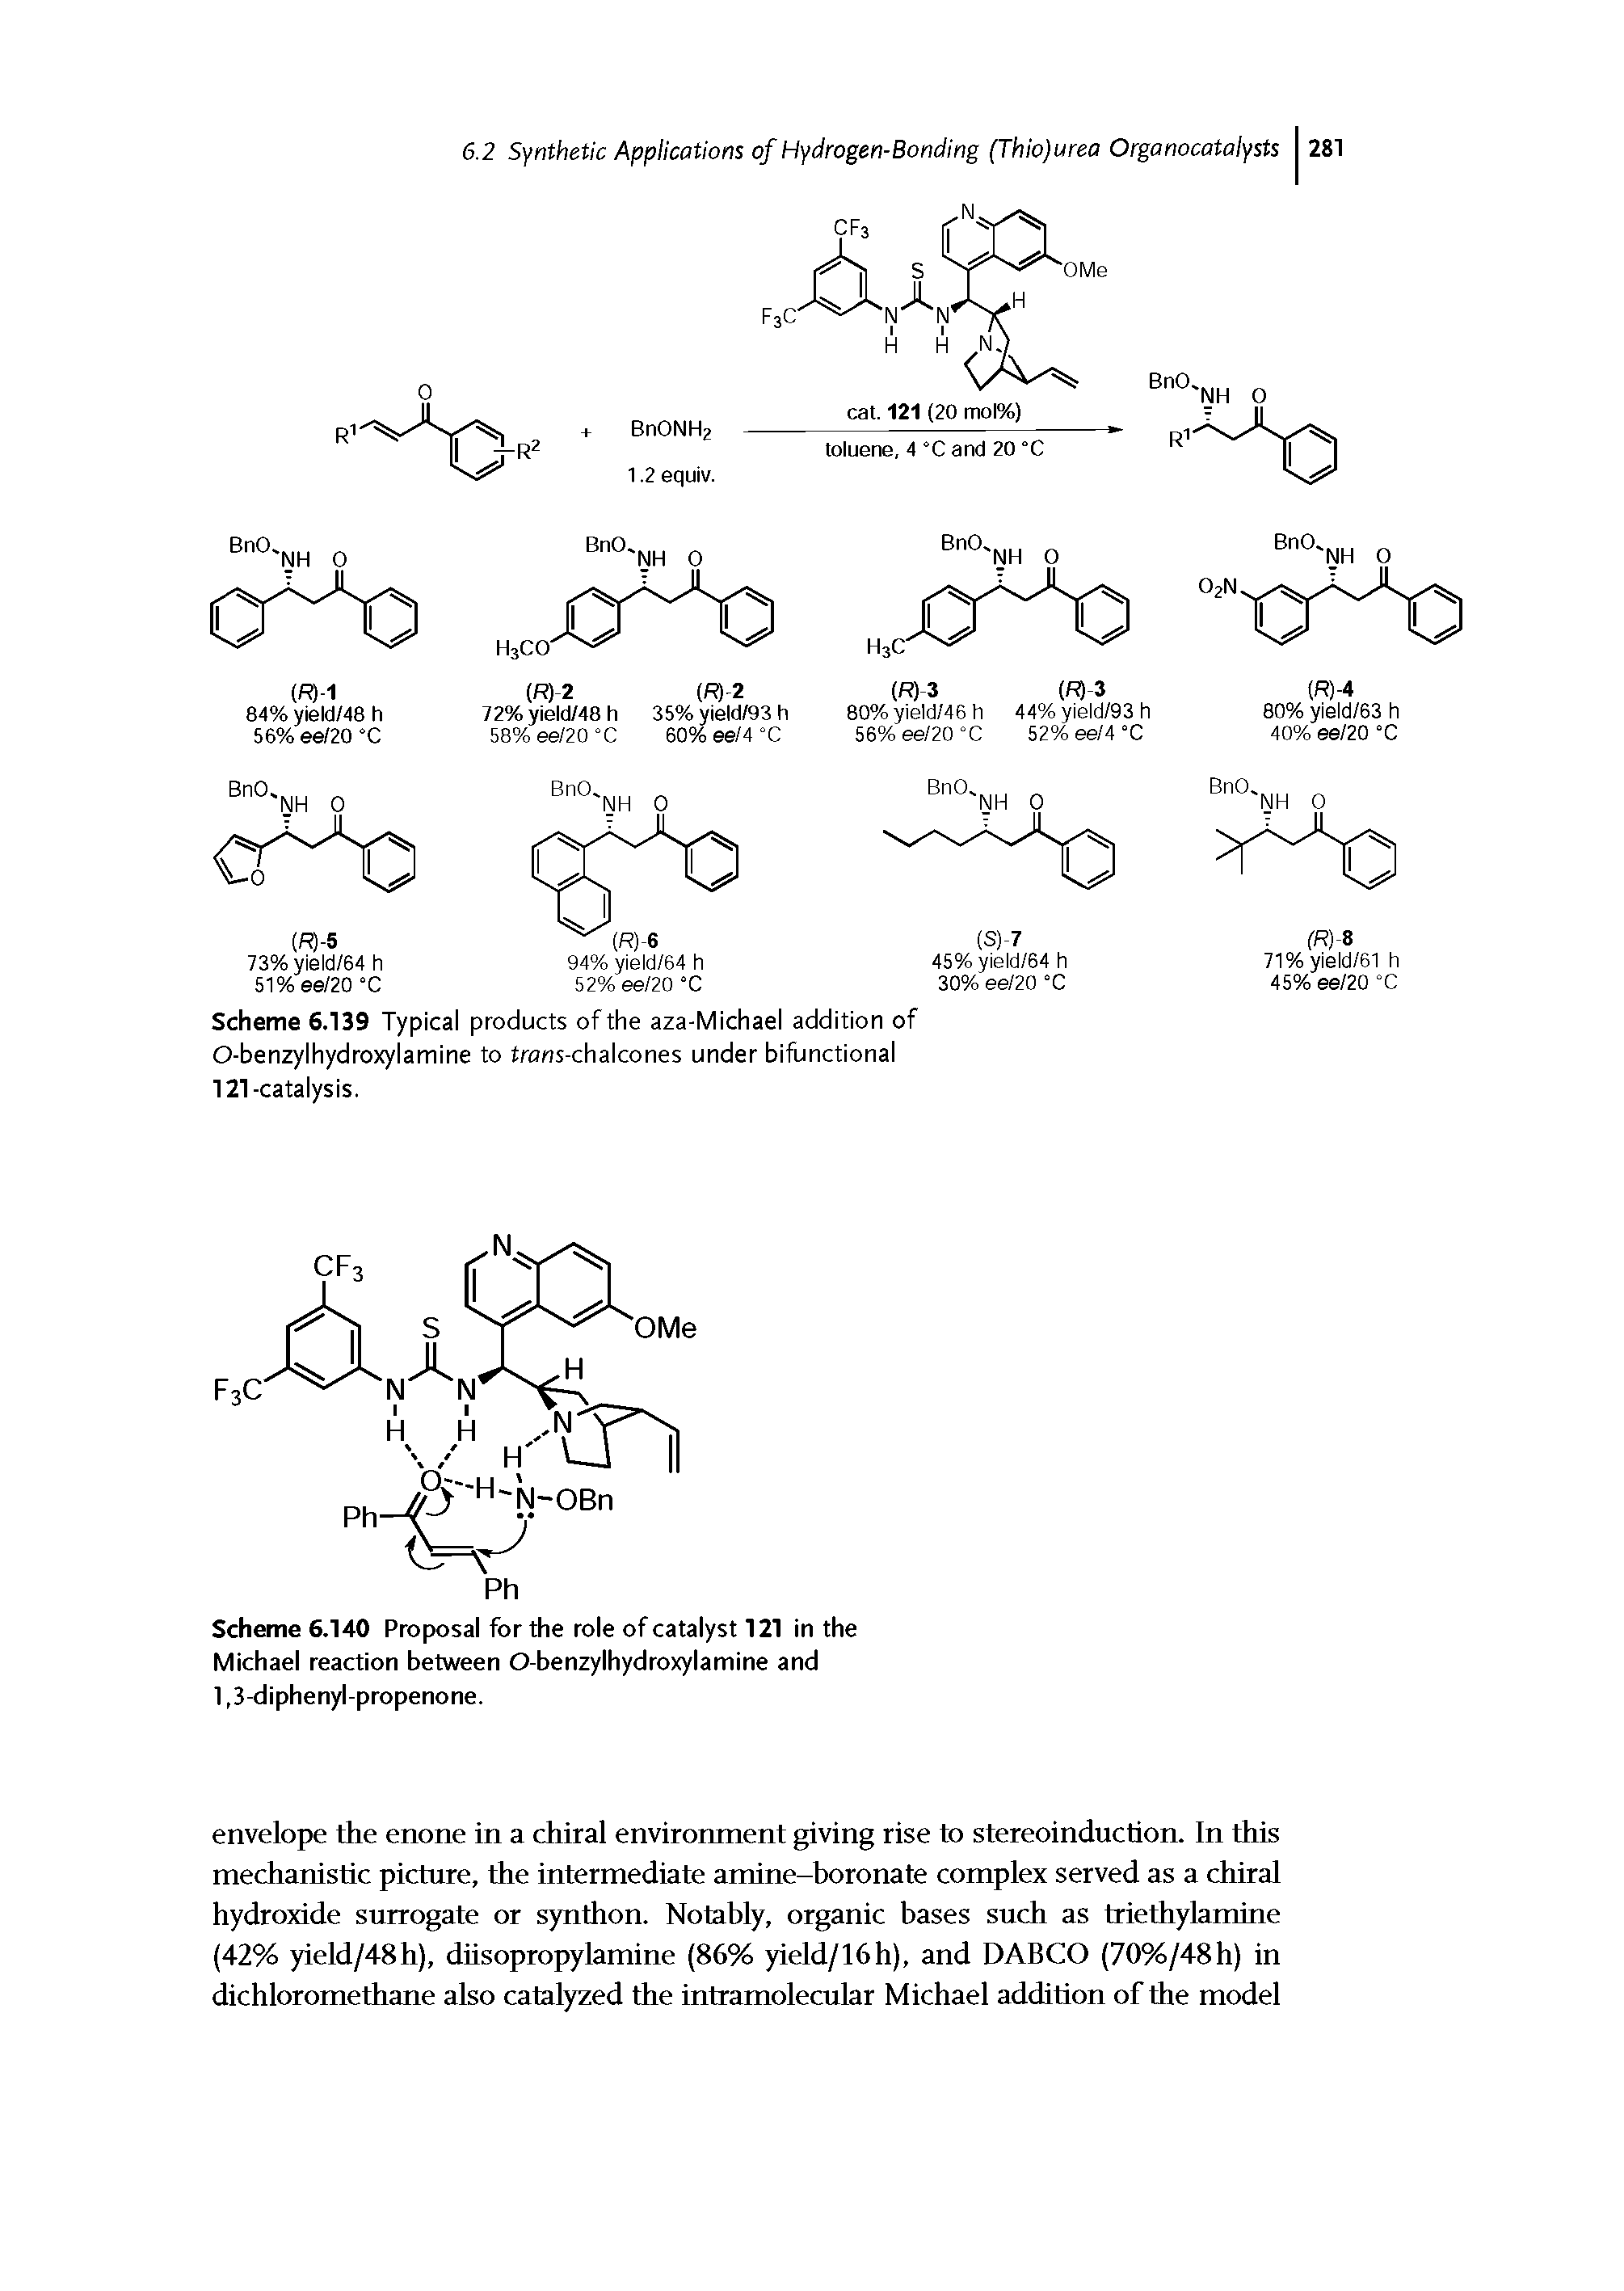 Scheme 6.139 Typical products of the aza-Michael addition of O-benzylhydroxylamine to frans-chalcones under bifunctional 121 -catalysis.